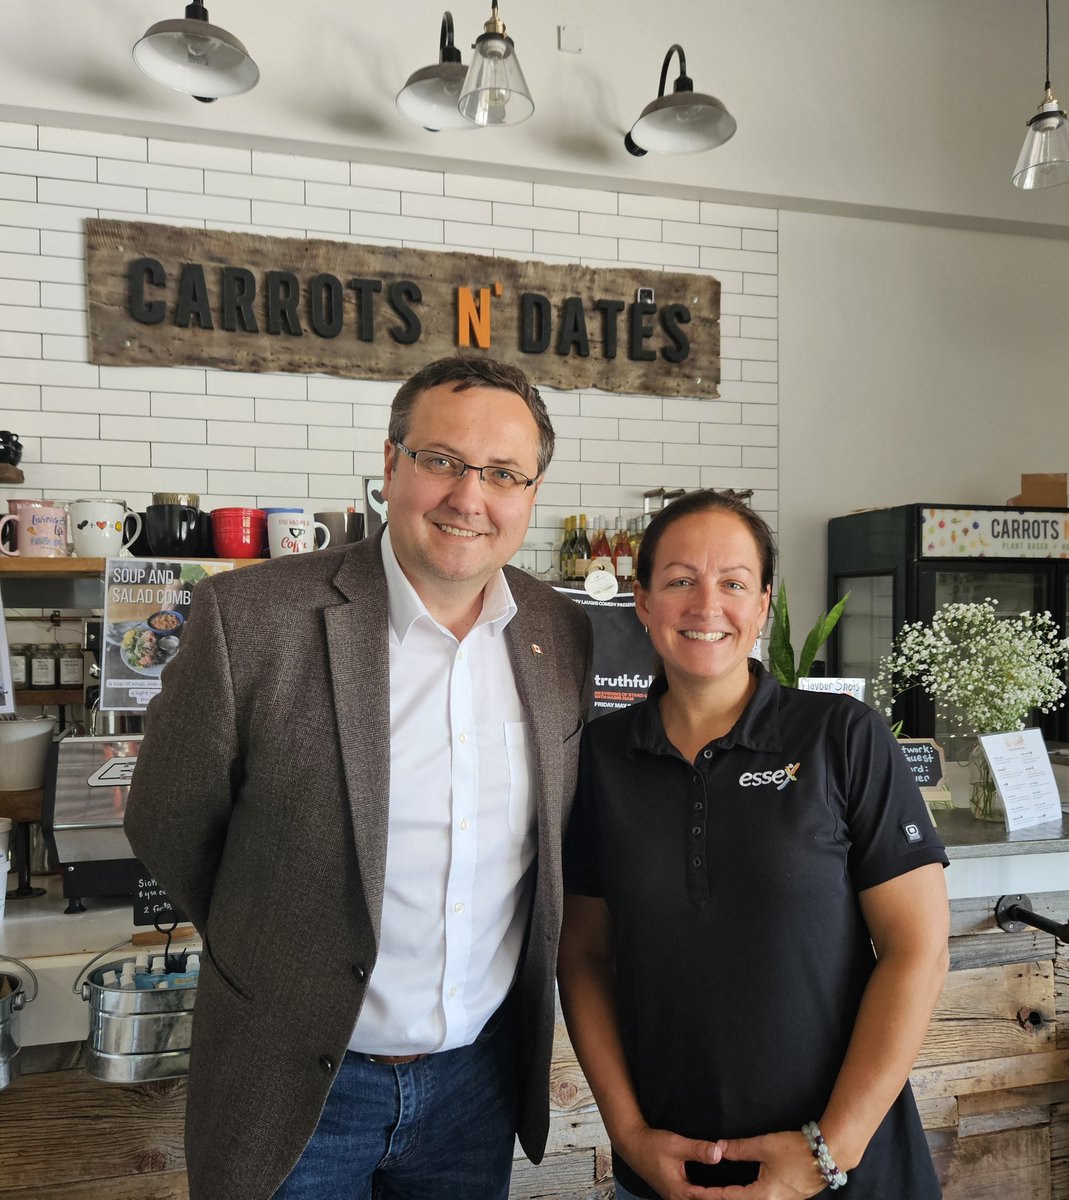 Always a good day to talk housing with Town of Essex Mayor @SherryBondy. Thank you for making the trek Mayor, and thank you Carrots N' Dates for the terrific coffee and service as always.